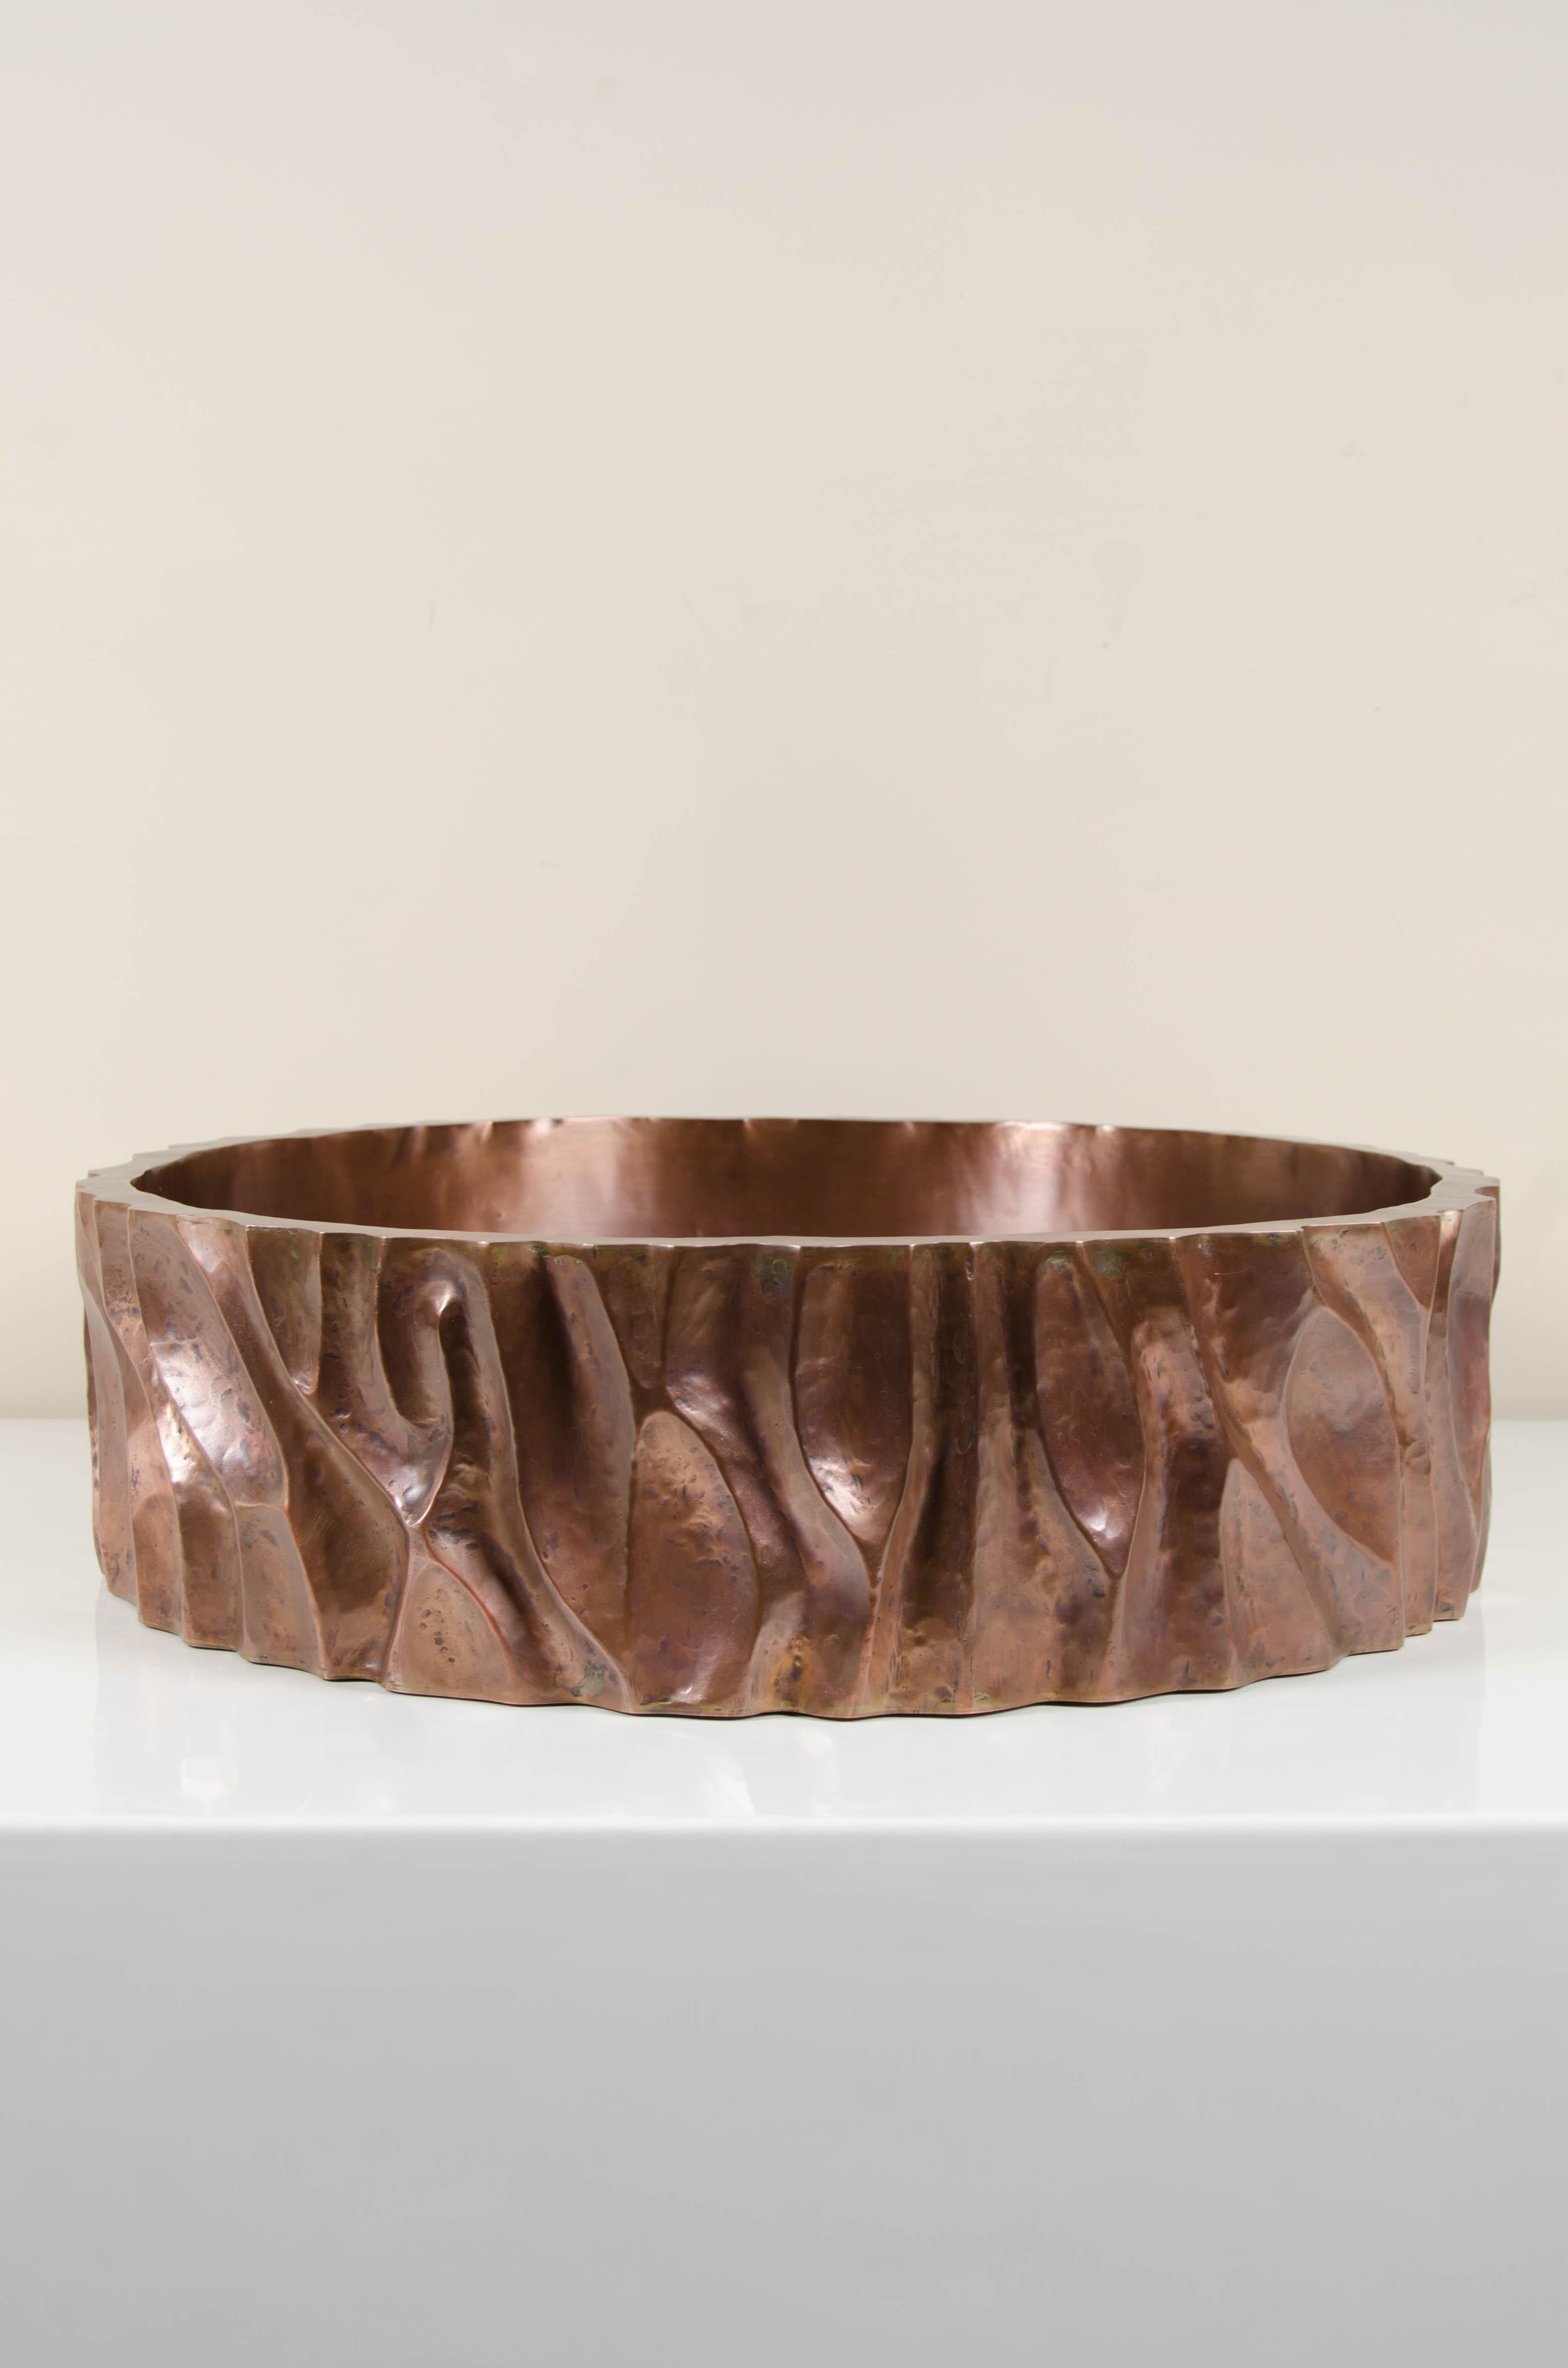 Low tree trunk cachepot
Antique copper
Hand repoussé
Limited edition.

Repoussé is the traditional art of hand-hammering decorative relief onto sheet metal. The technique originated circa 800 BC between Asia and Europe and in Chinese historical